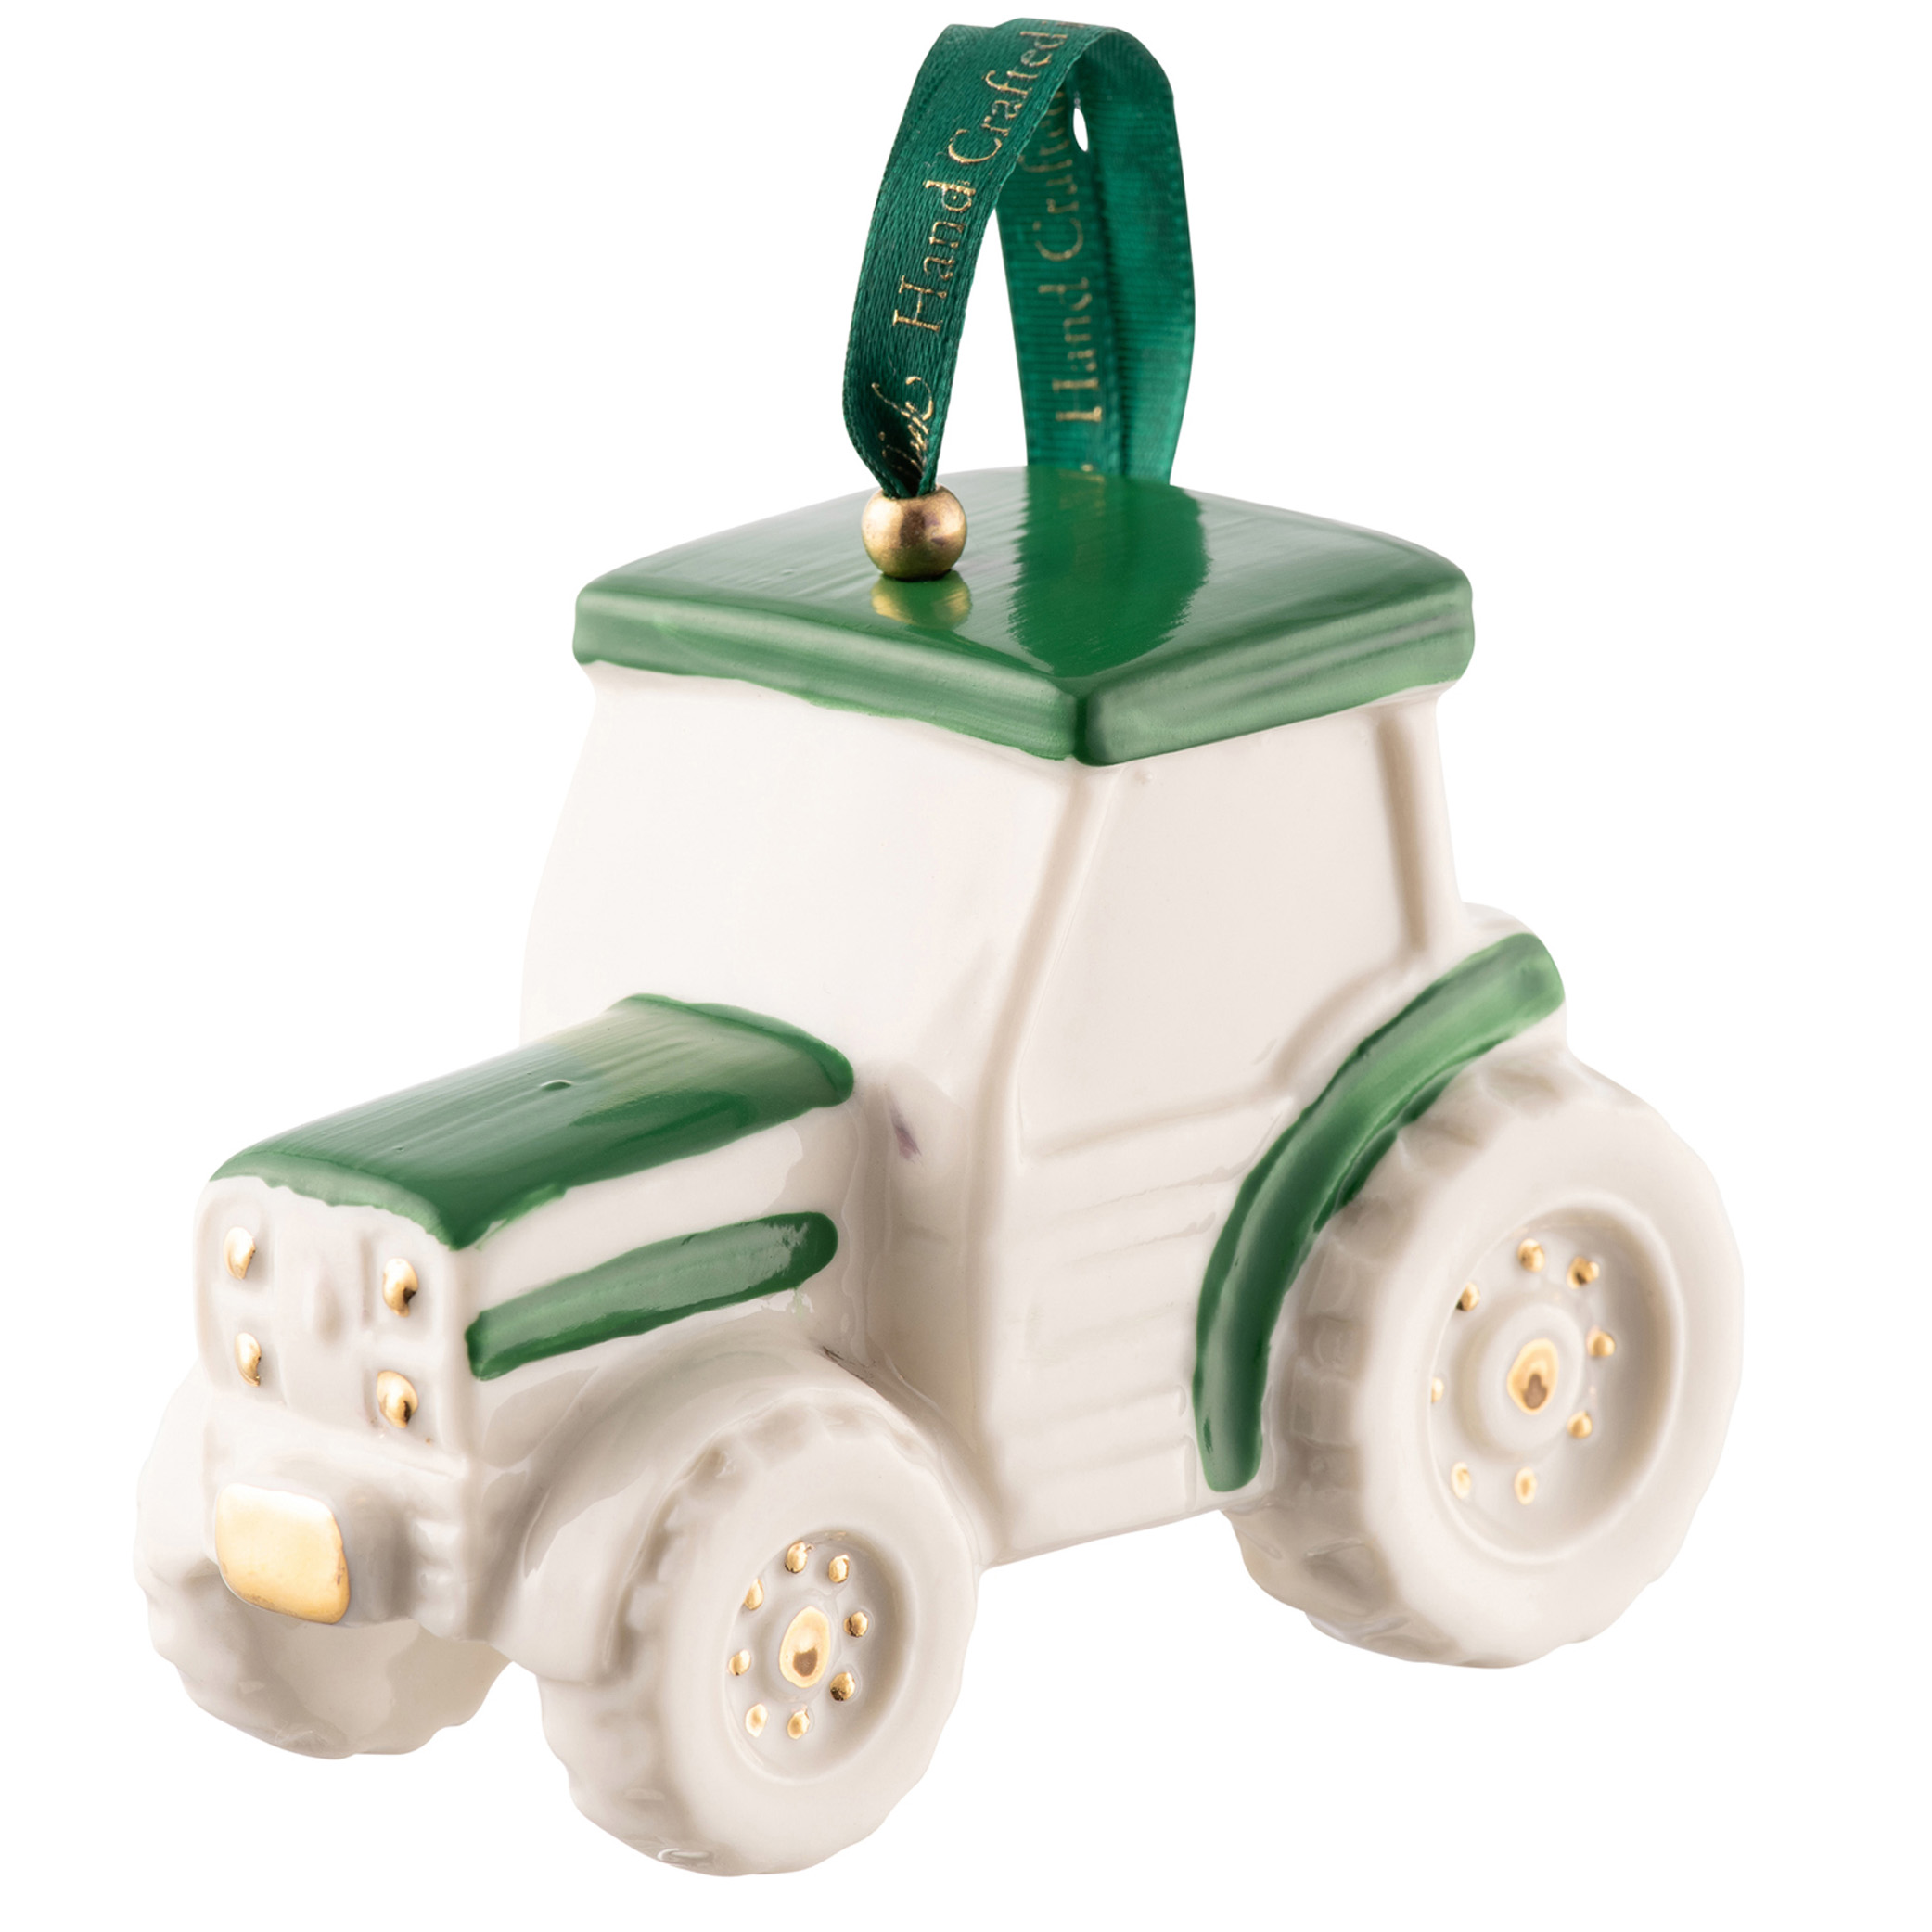 Product image for Irish Christmas | Belleek Pottery Tractor Ornament